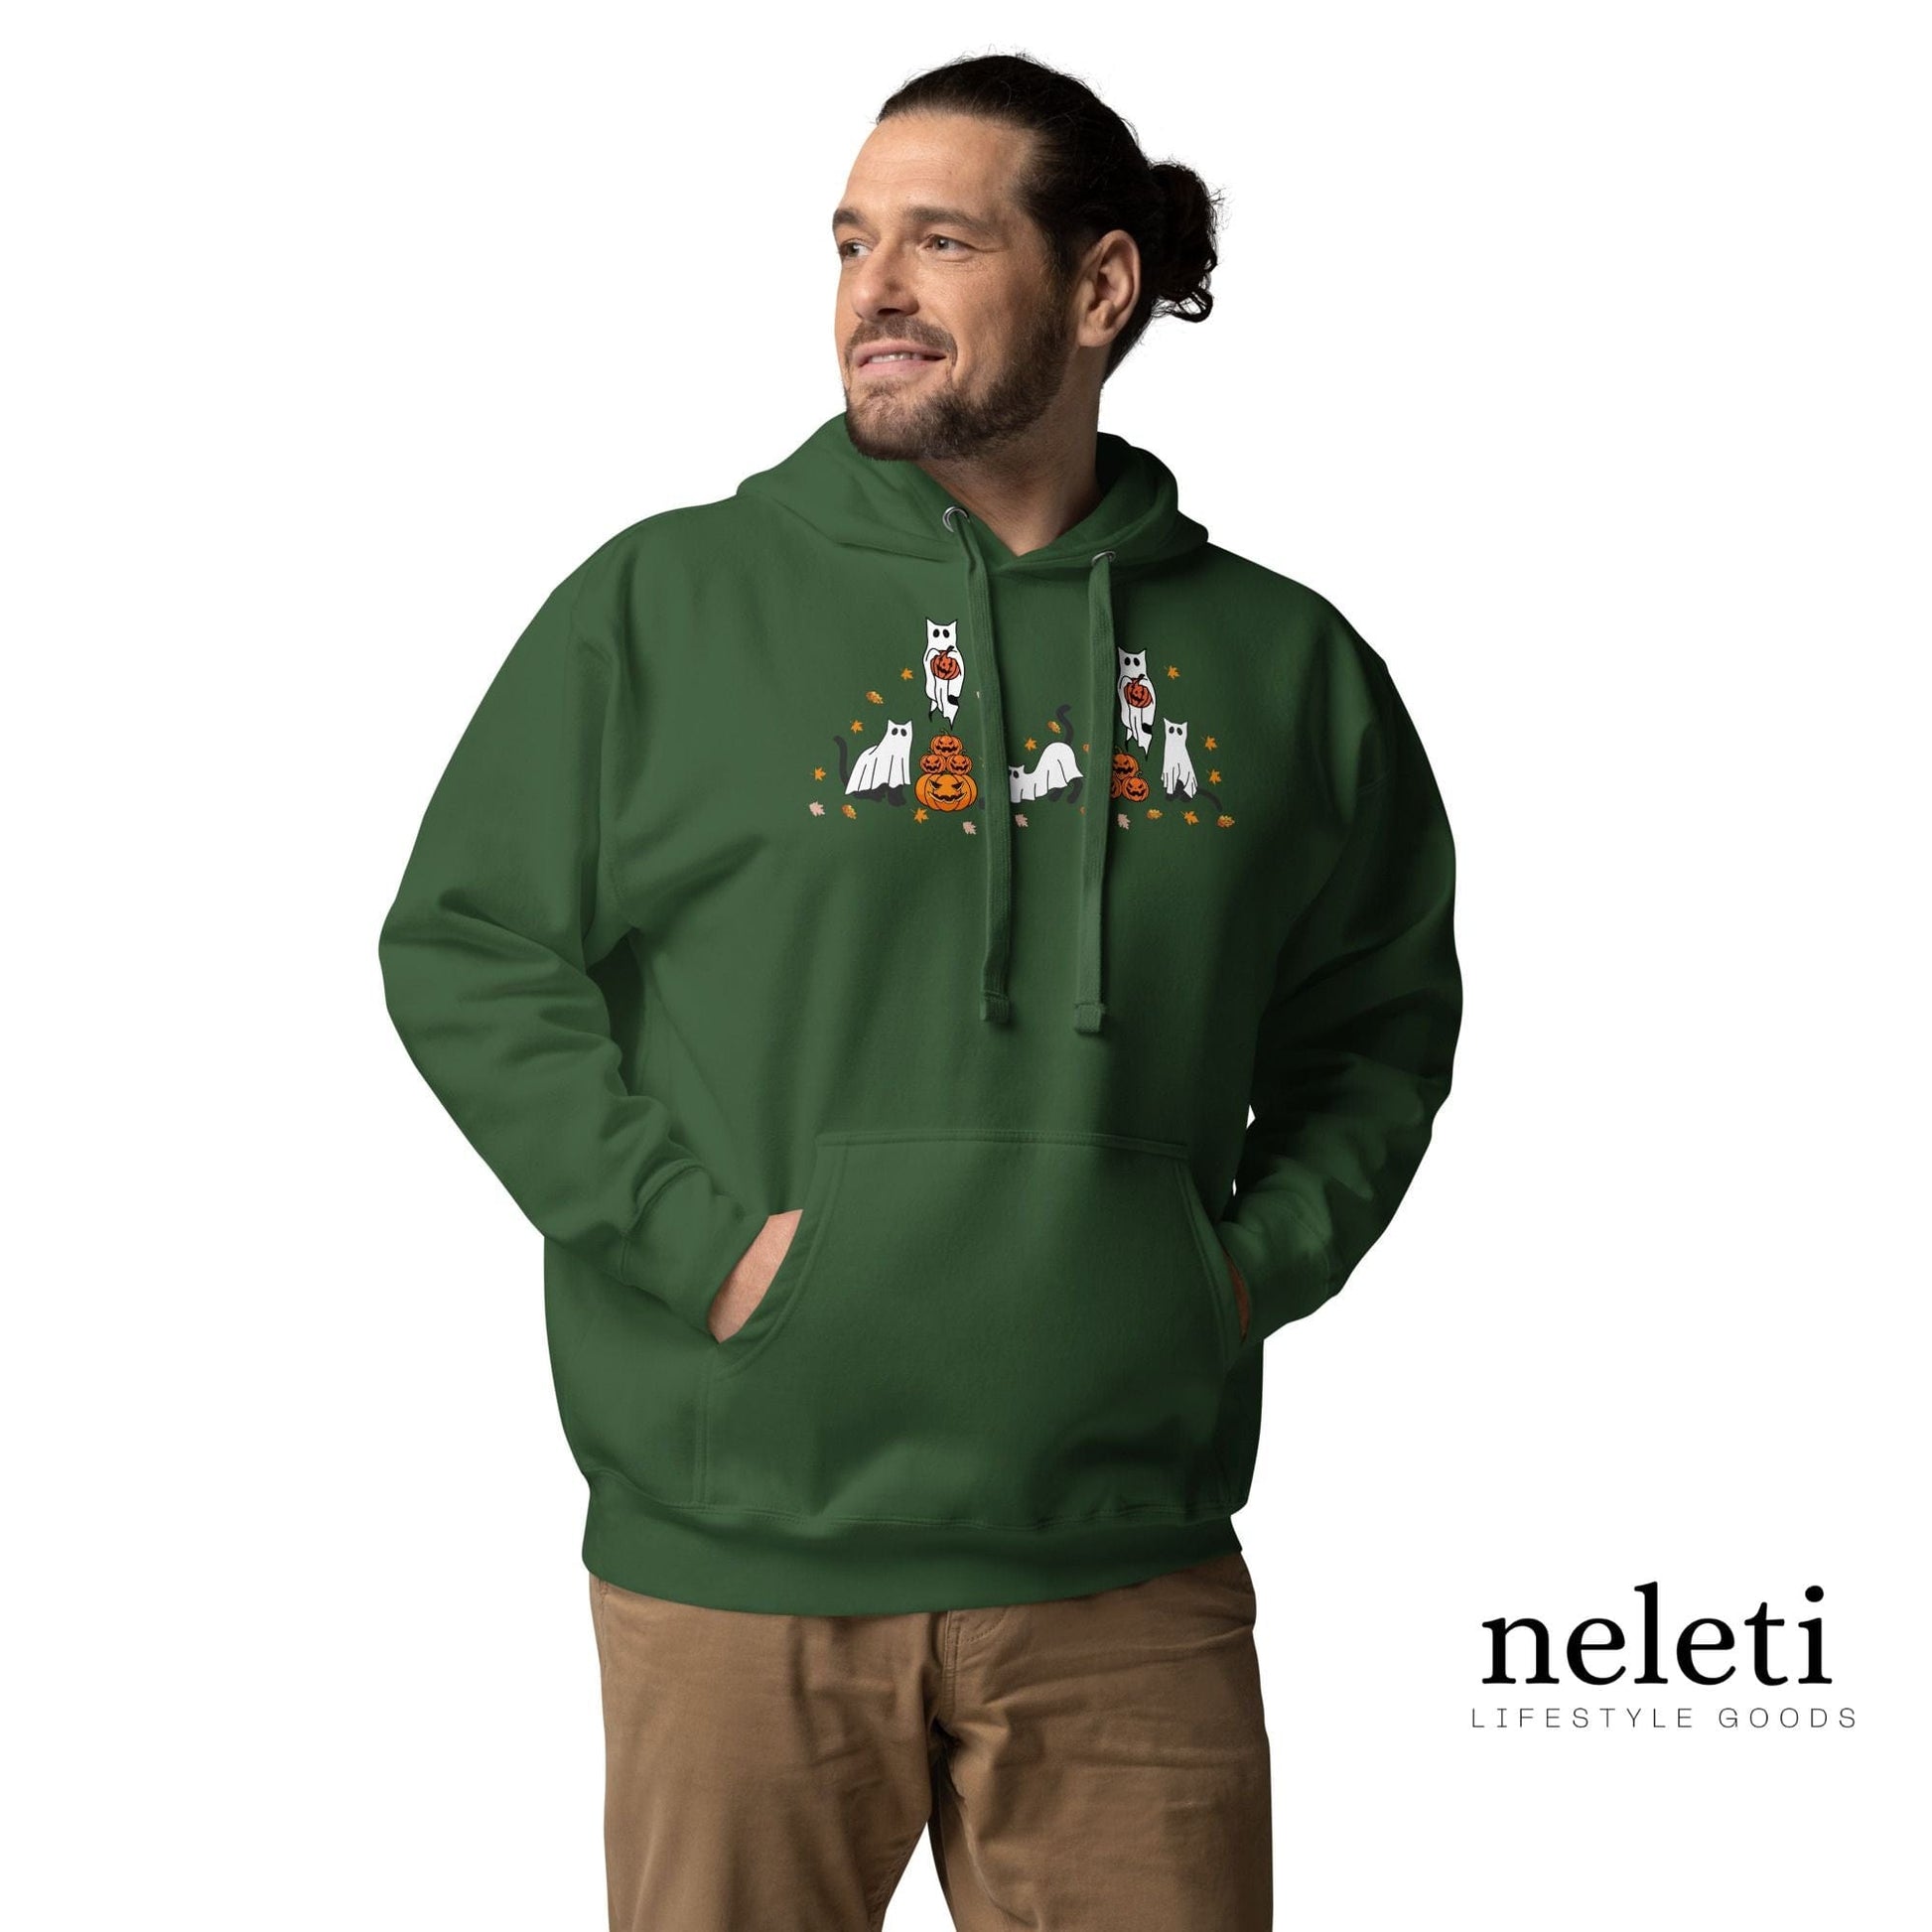 neleti.com-haloween-forest-green-hoodie-for-cat-lovers